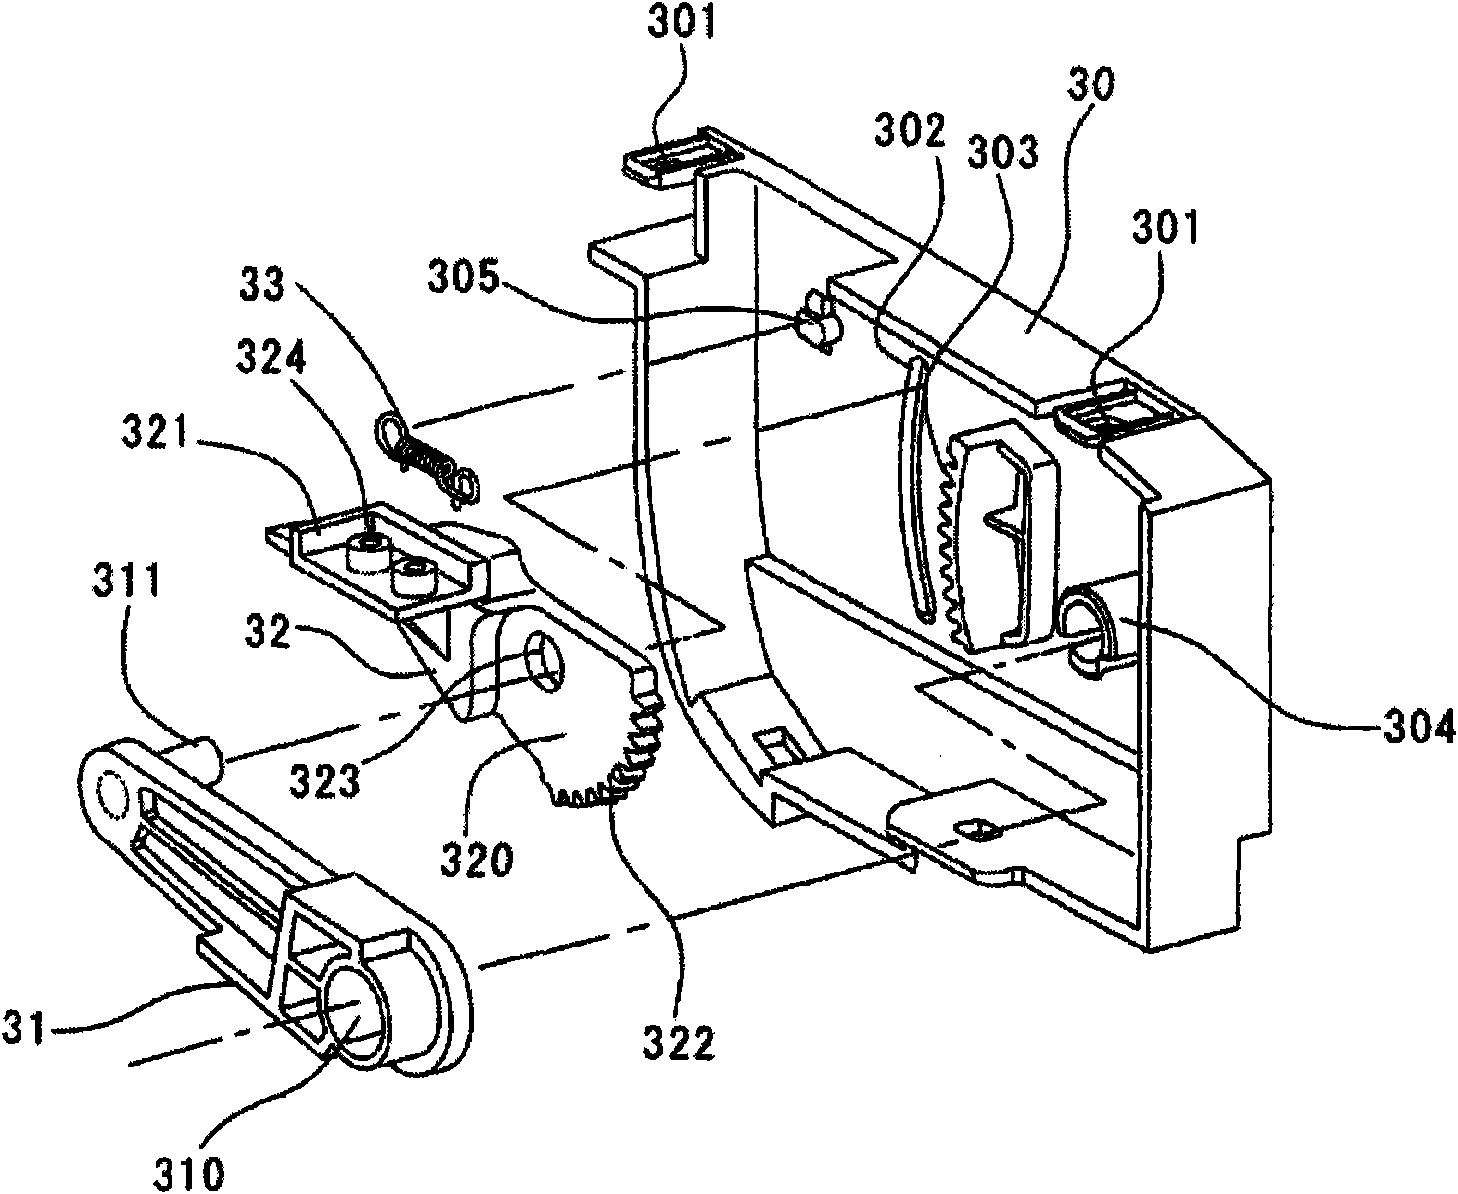 Accommodation device for vehicle use